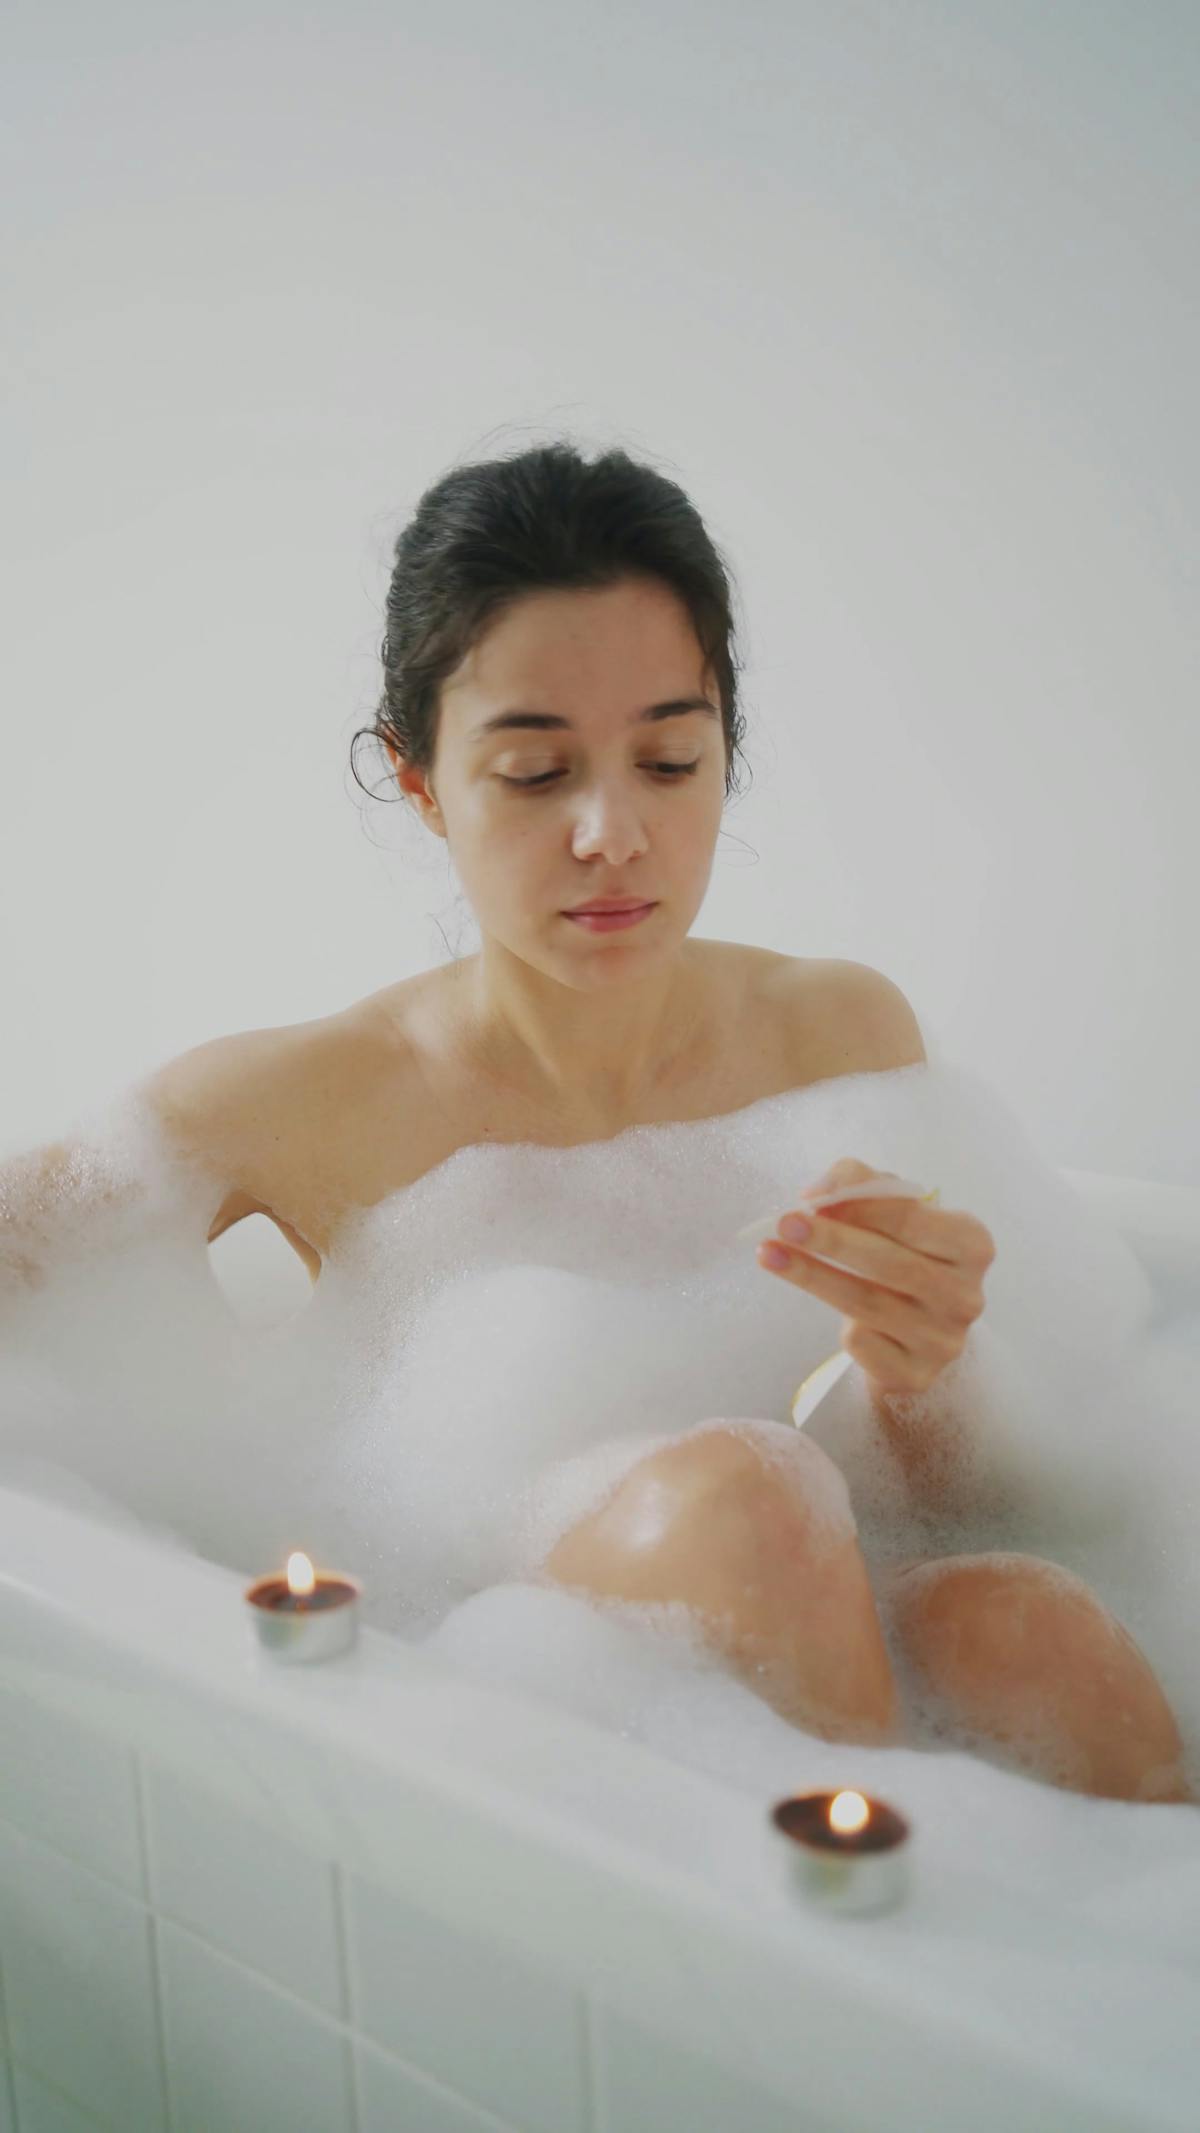 A Person In A Bathtub Holding A Bath Bomb Free Stock Video Footage Royalty Free 4k And Hd Video Clip 